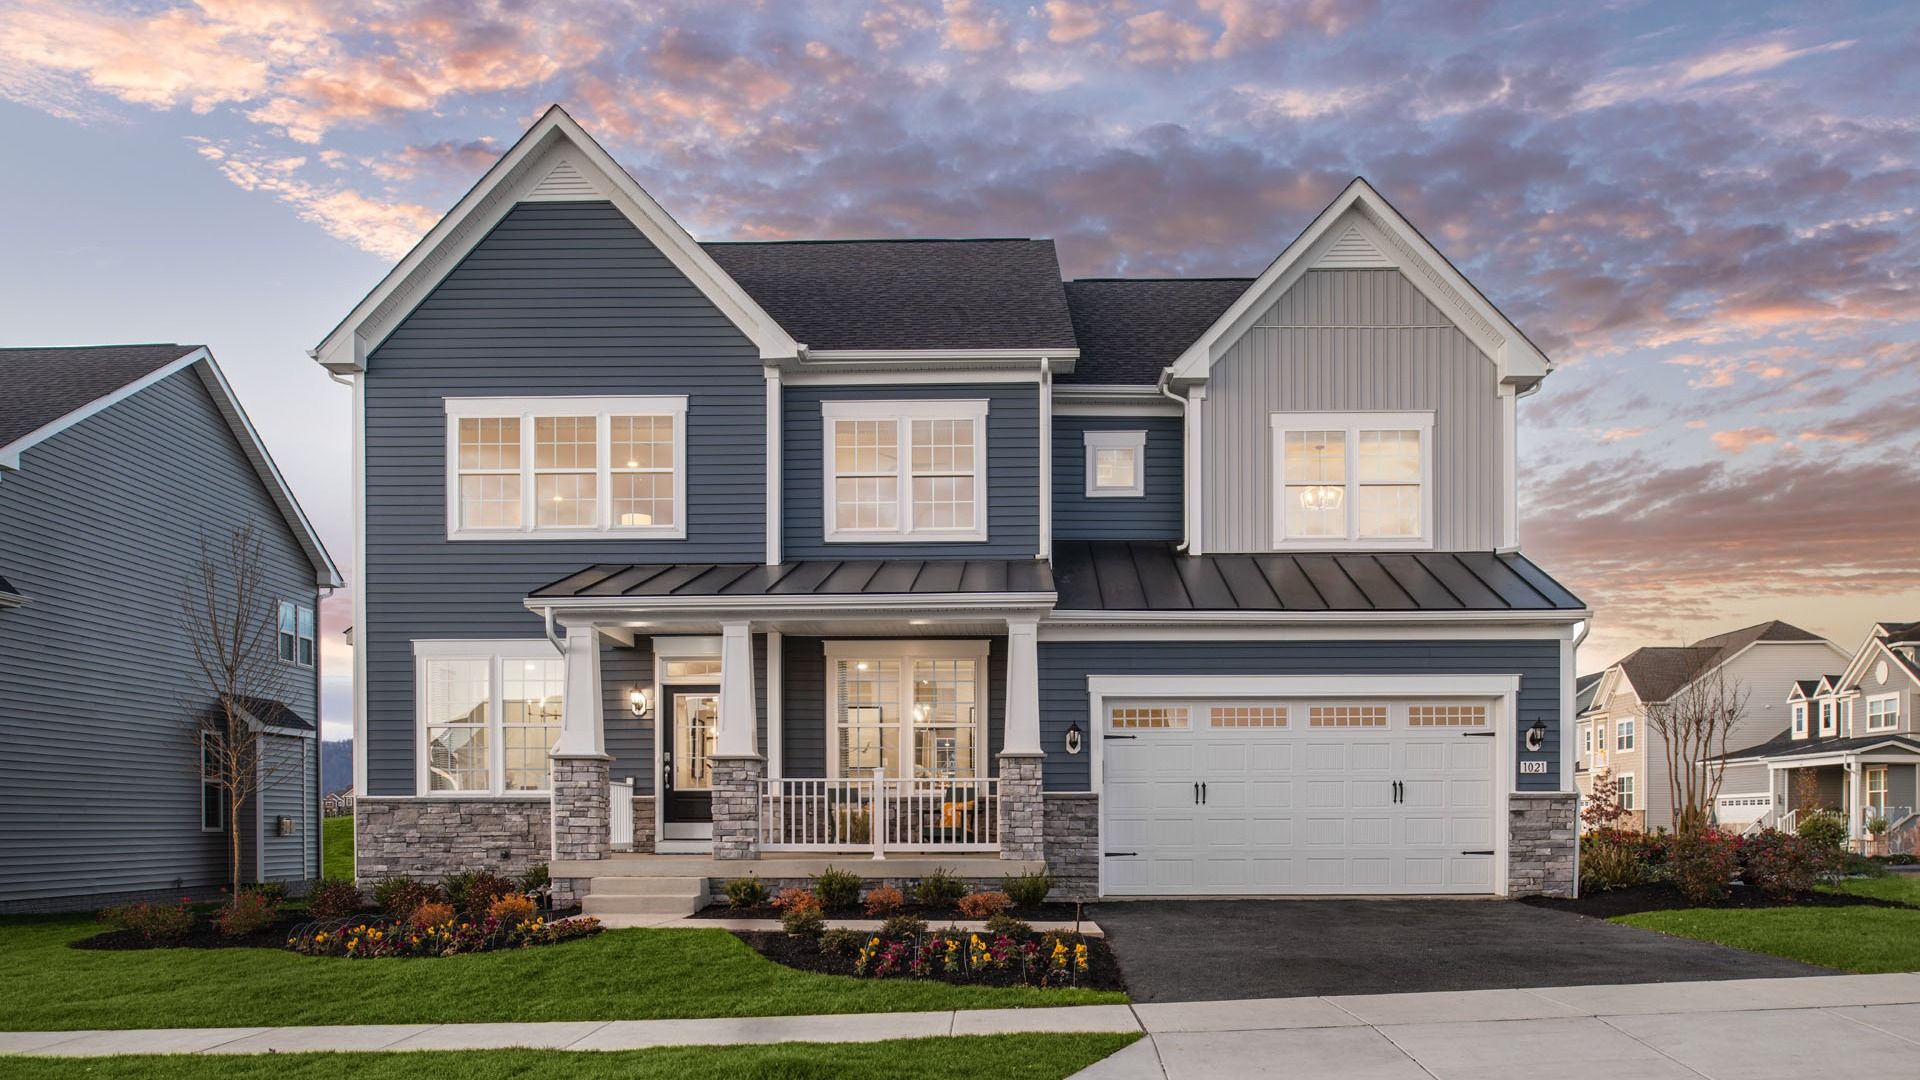 Emory II Model:The Emory II Model a two-story family home with a 2-car garage at Brunswick Crossing